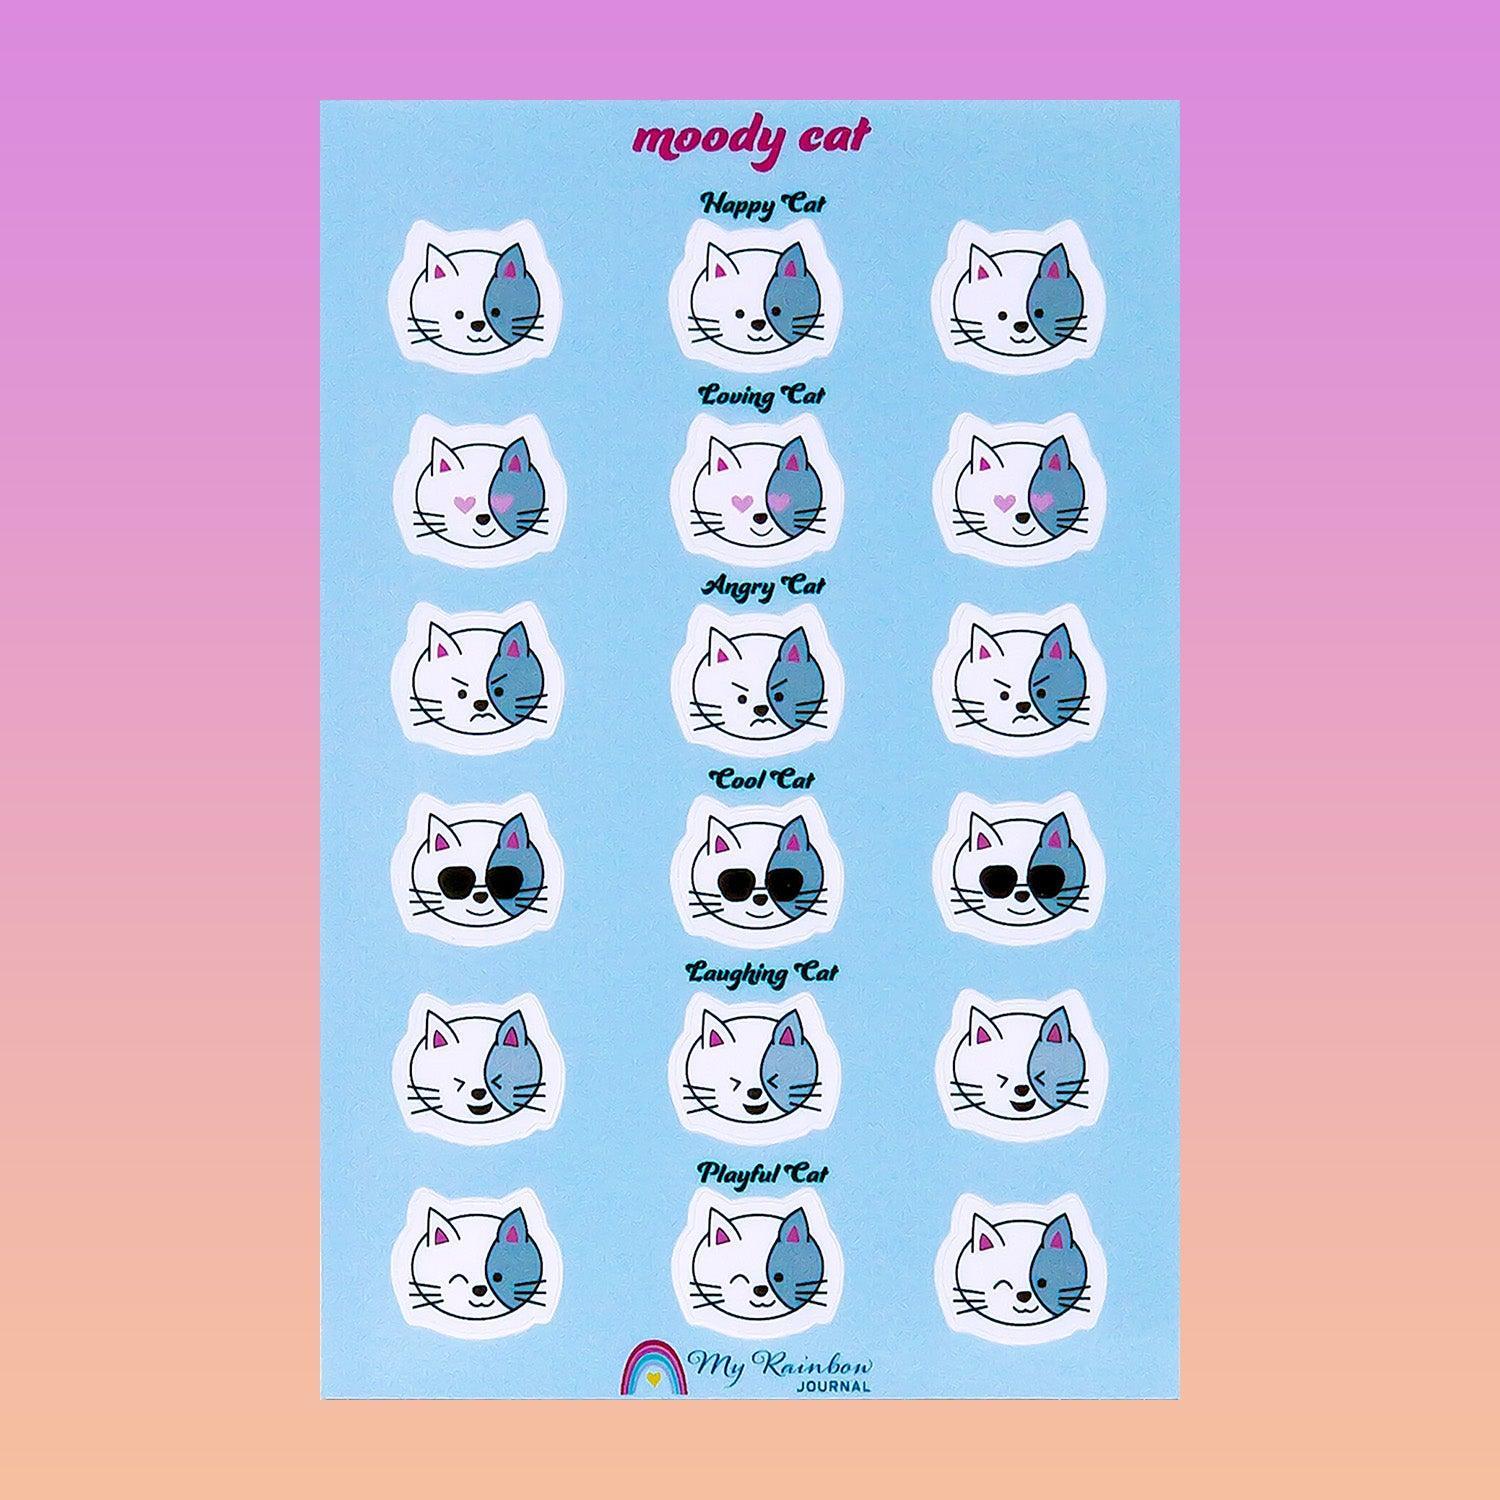 Moody Cat Sticker Sheet features a cat that is very moody and expresses different emotions in a funny and adorable way.